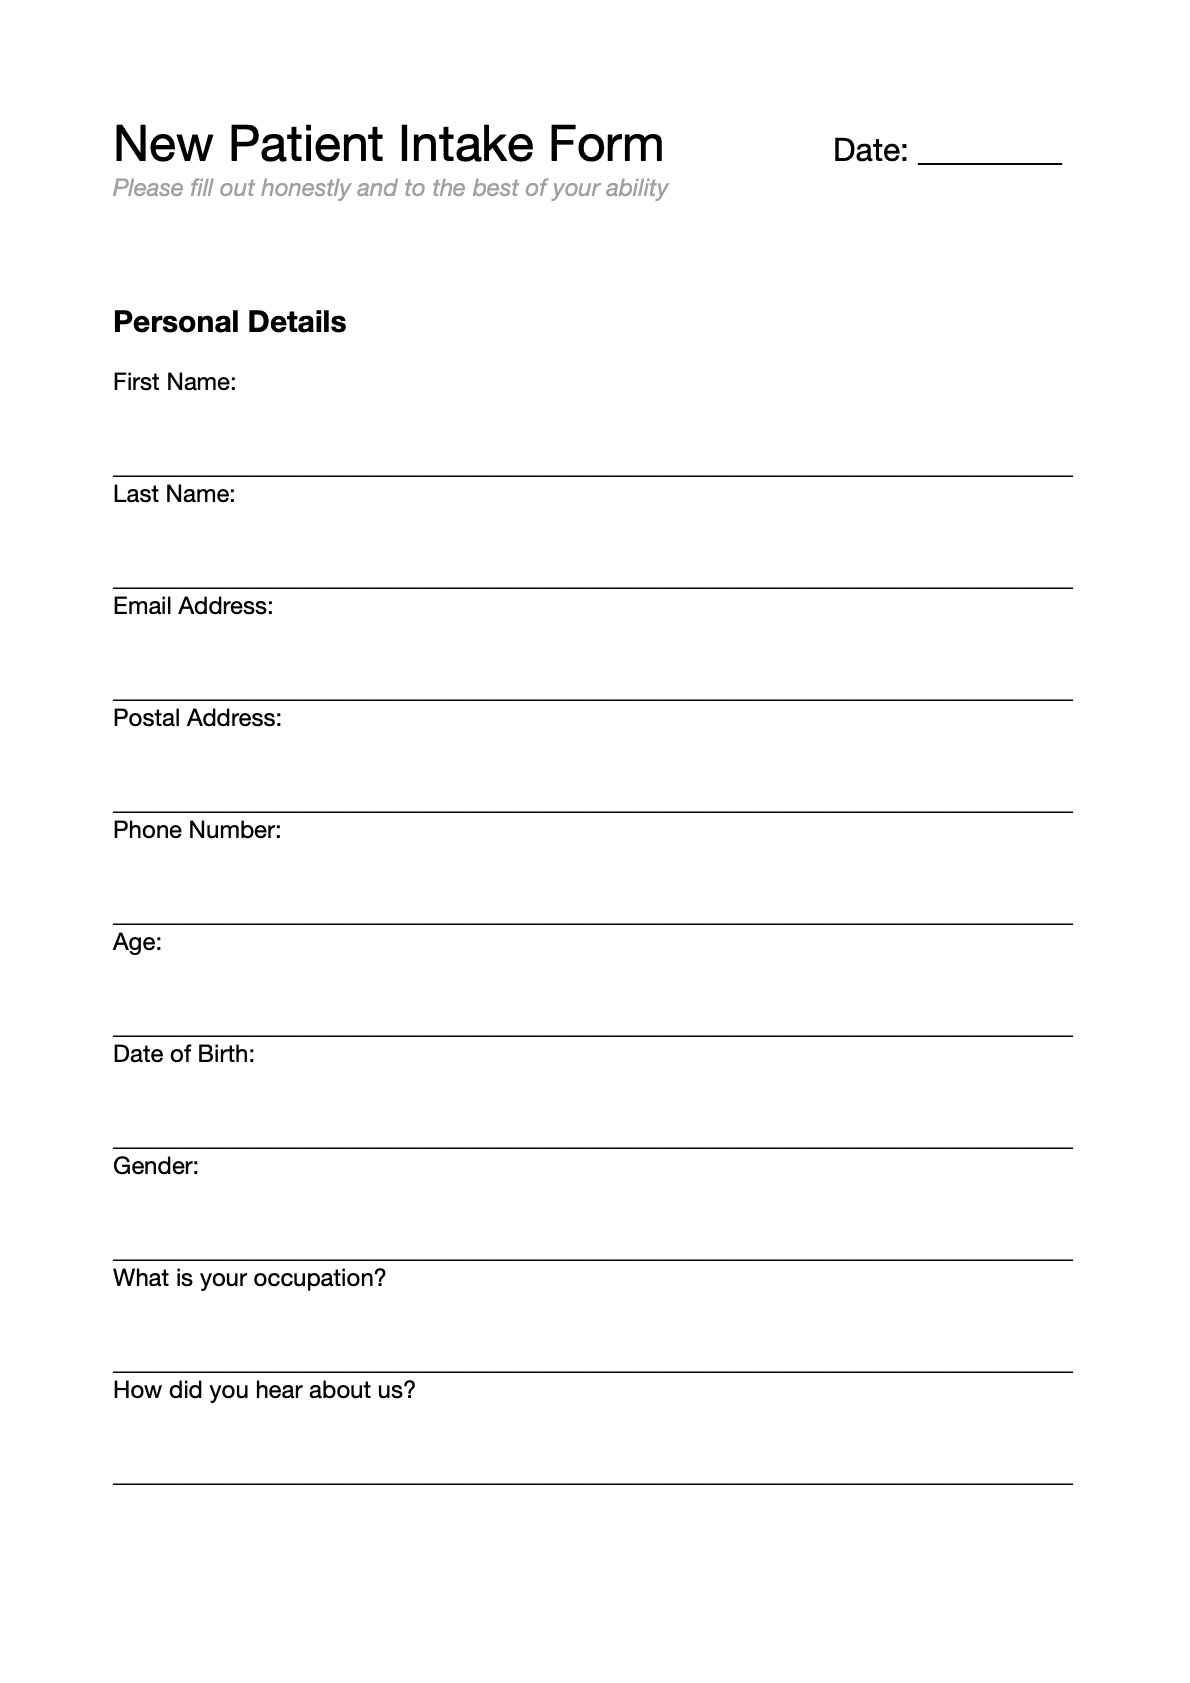 New Patient Intake Forms Printable 7440